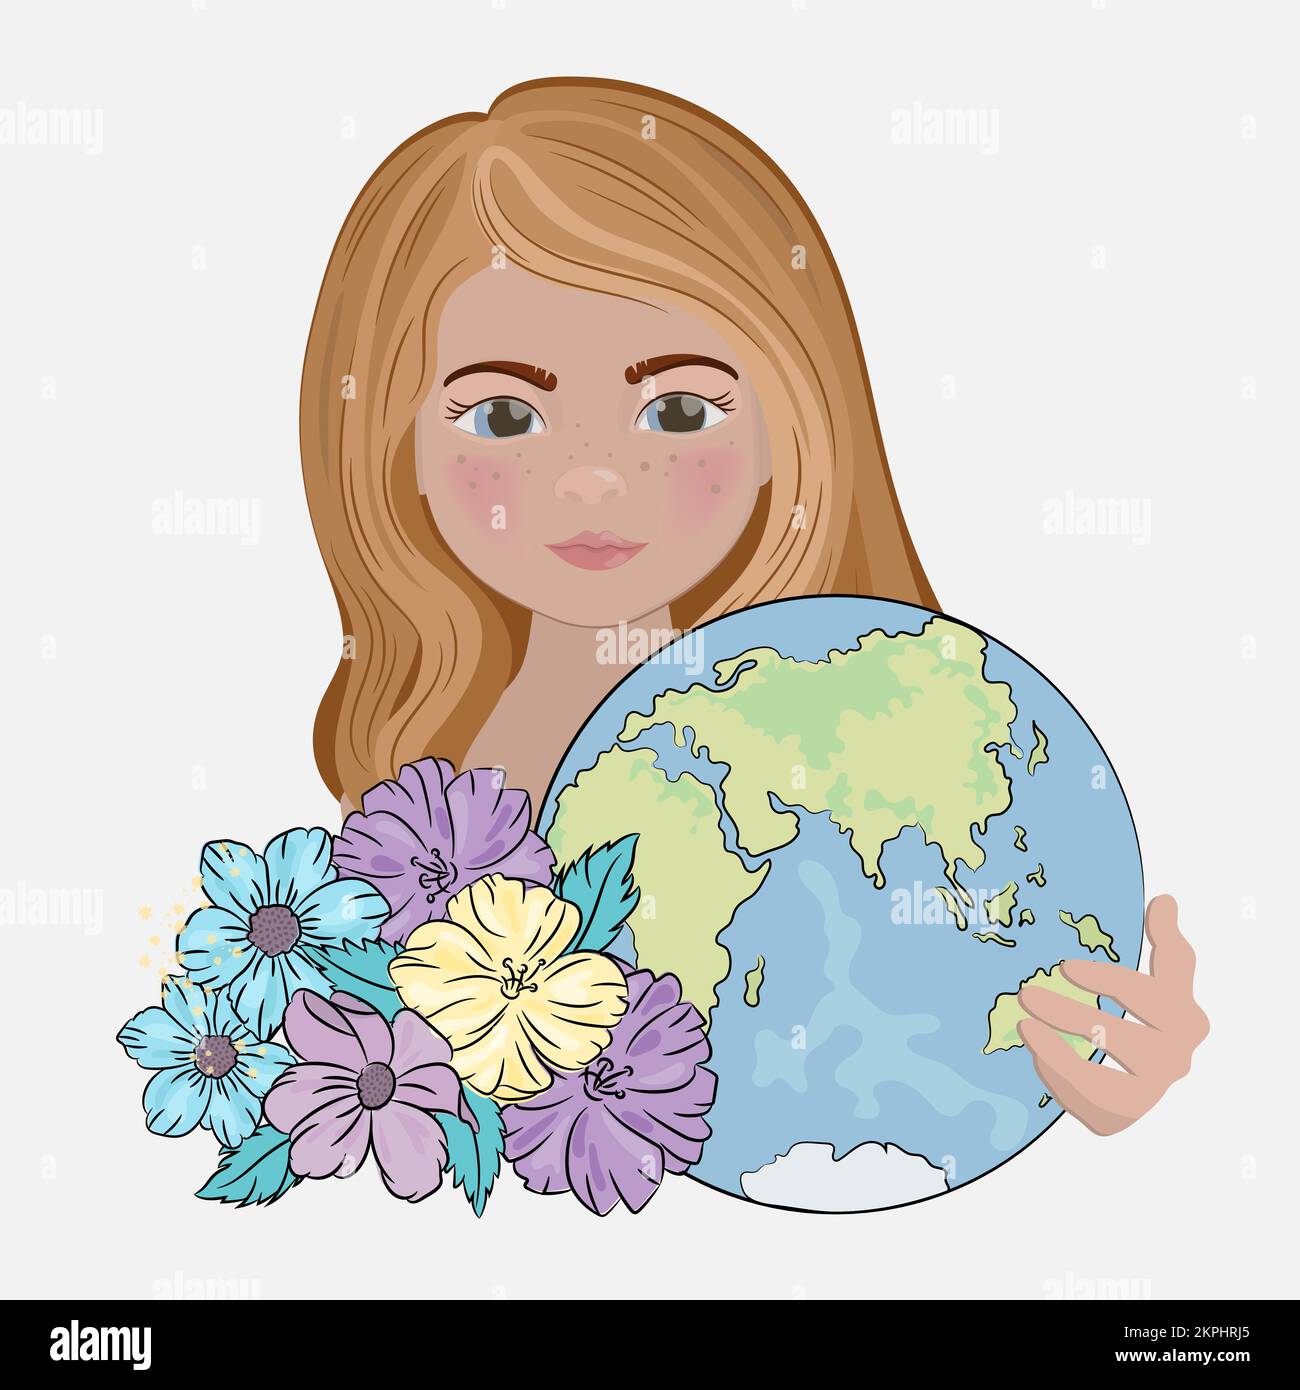 Earth flowers Stock Vector Images - Alamy